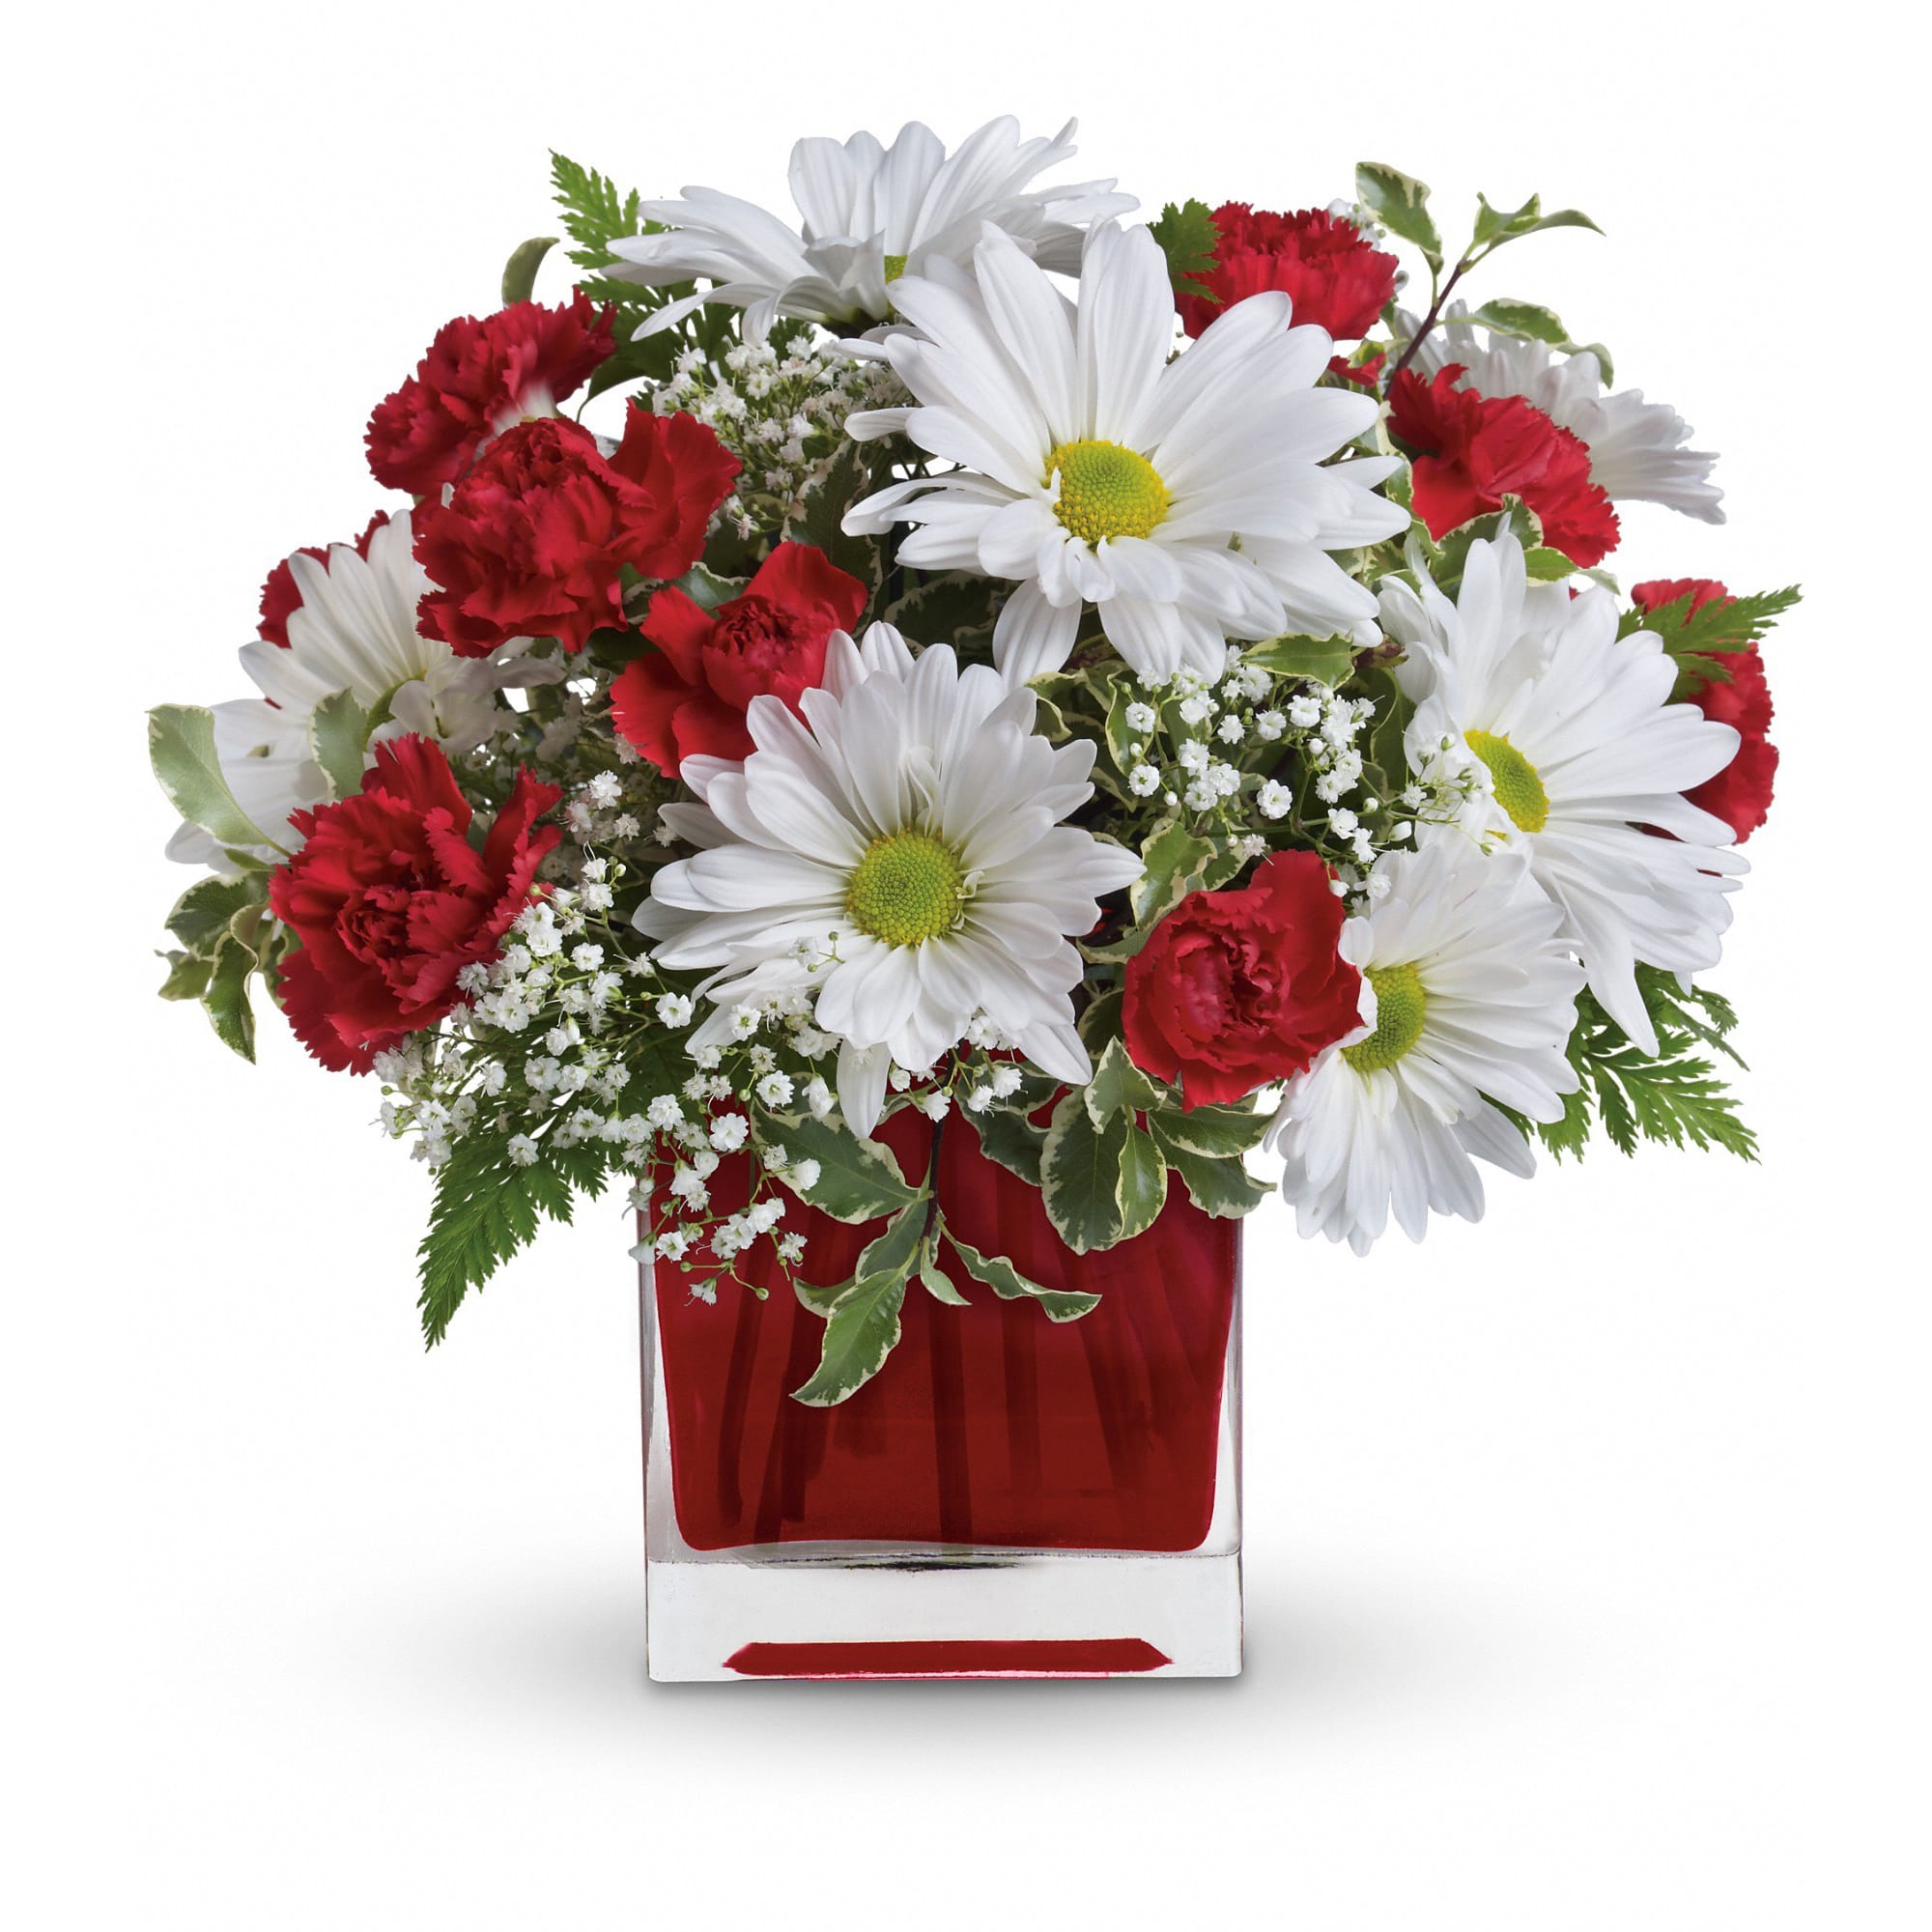 Red and White Delight by Teleflora - Make her day! Send your special someone this charming bouquet arranged in a ruby red glass cube. It's a gift that will surely delight!